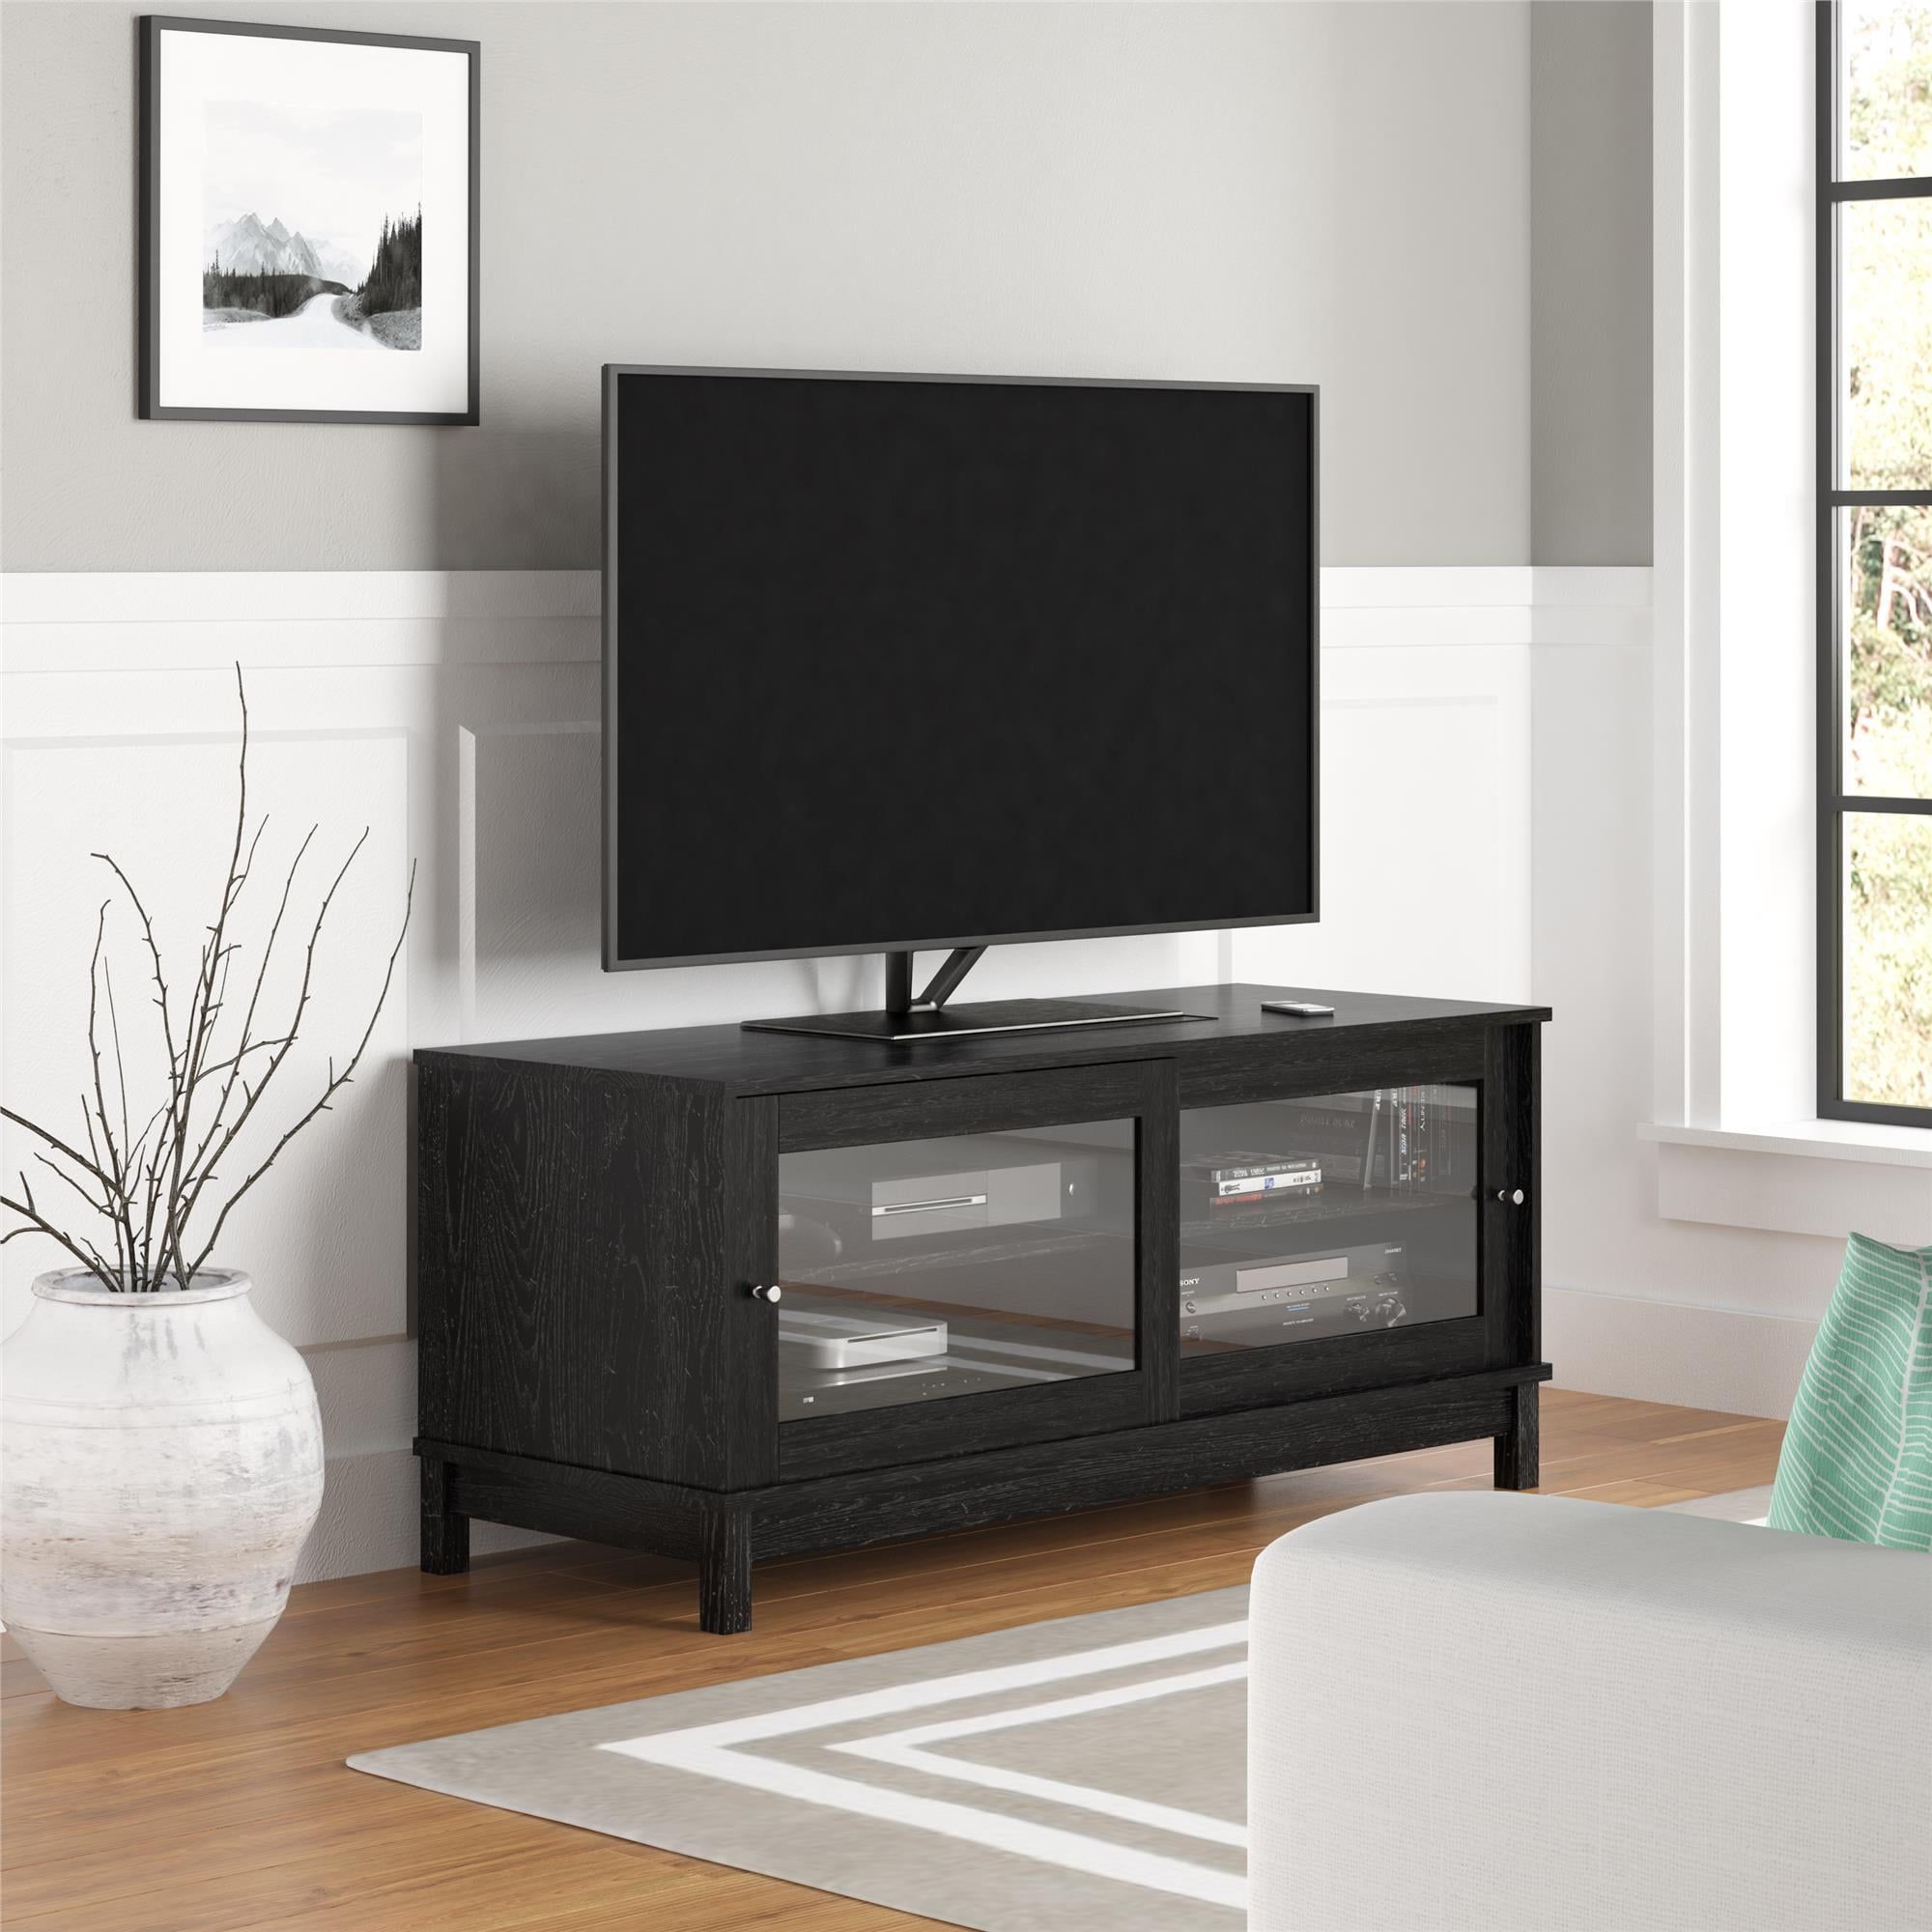 Mainstays Tv Stand For Tvs Up To 55", Multiple Finishes – Black Inside Tv Stands With 2 Doors And 2 Open Shelves (Gallery 19 of 20)